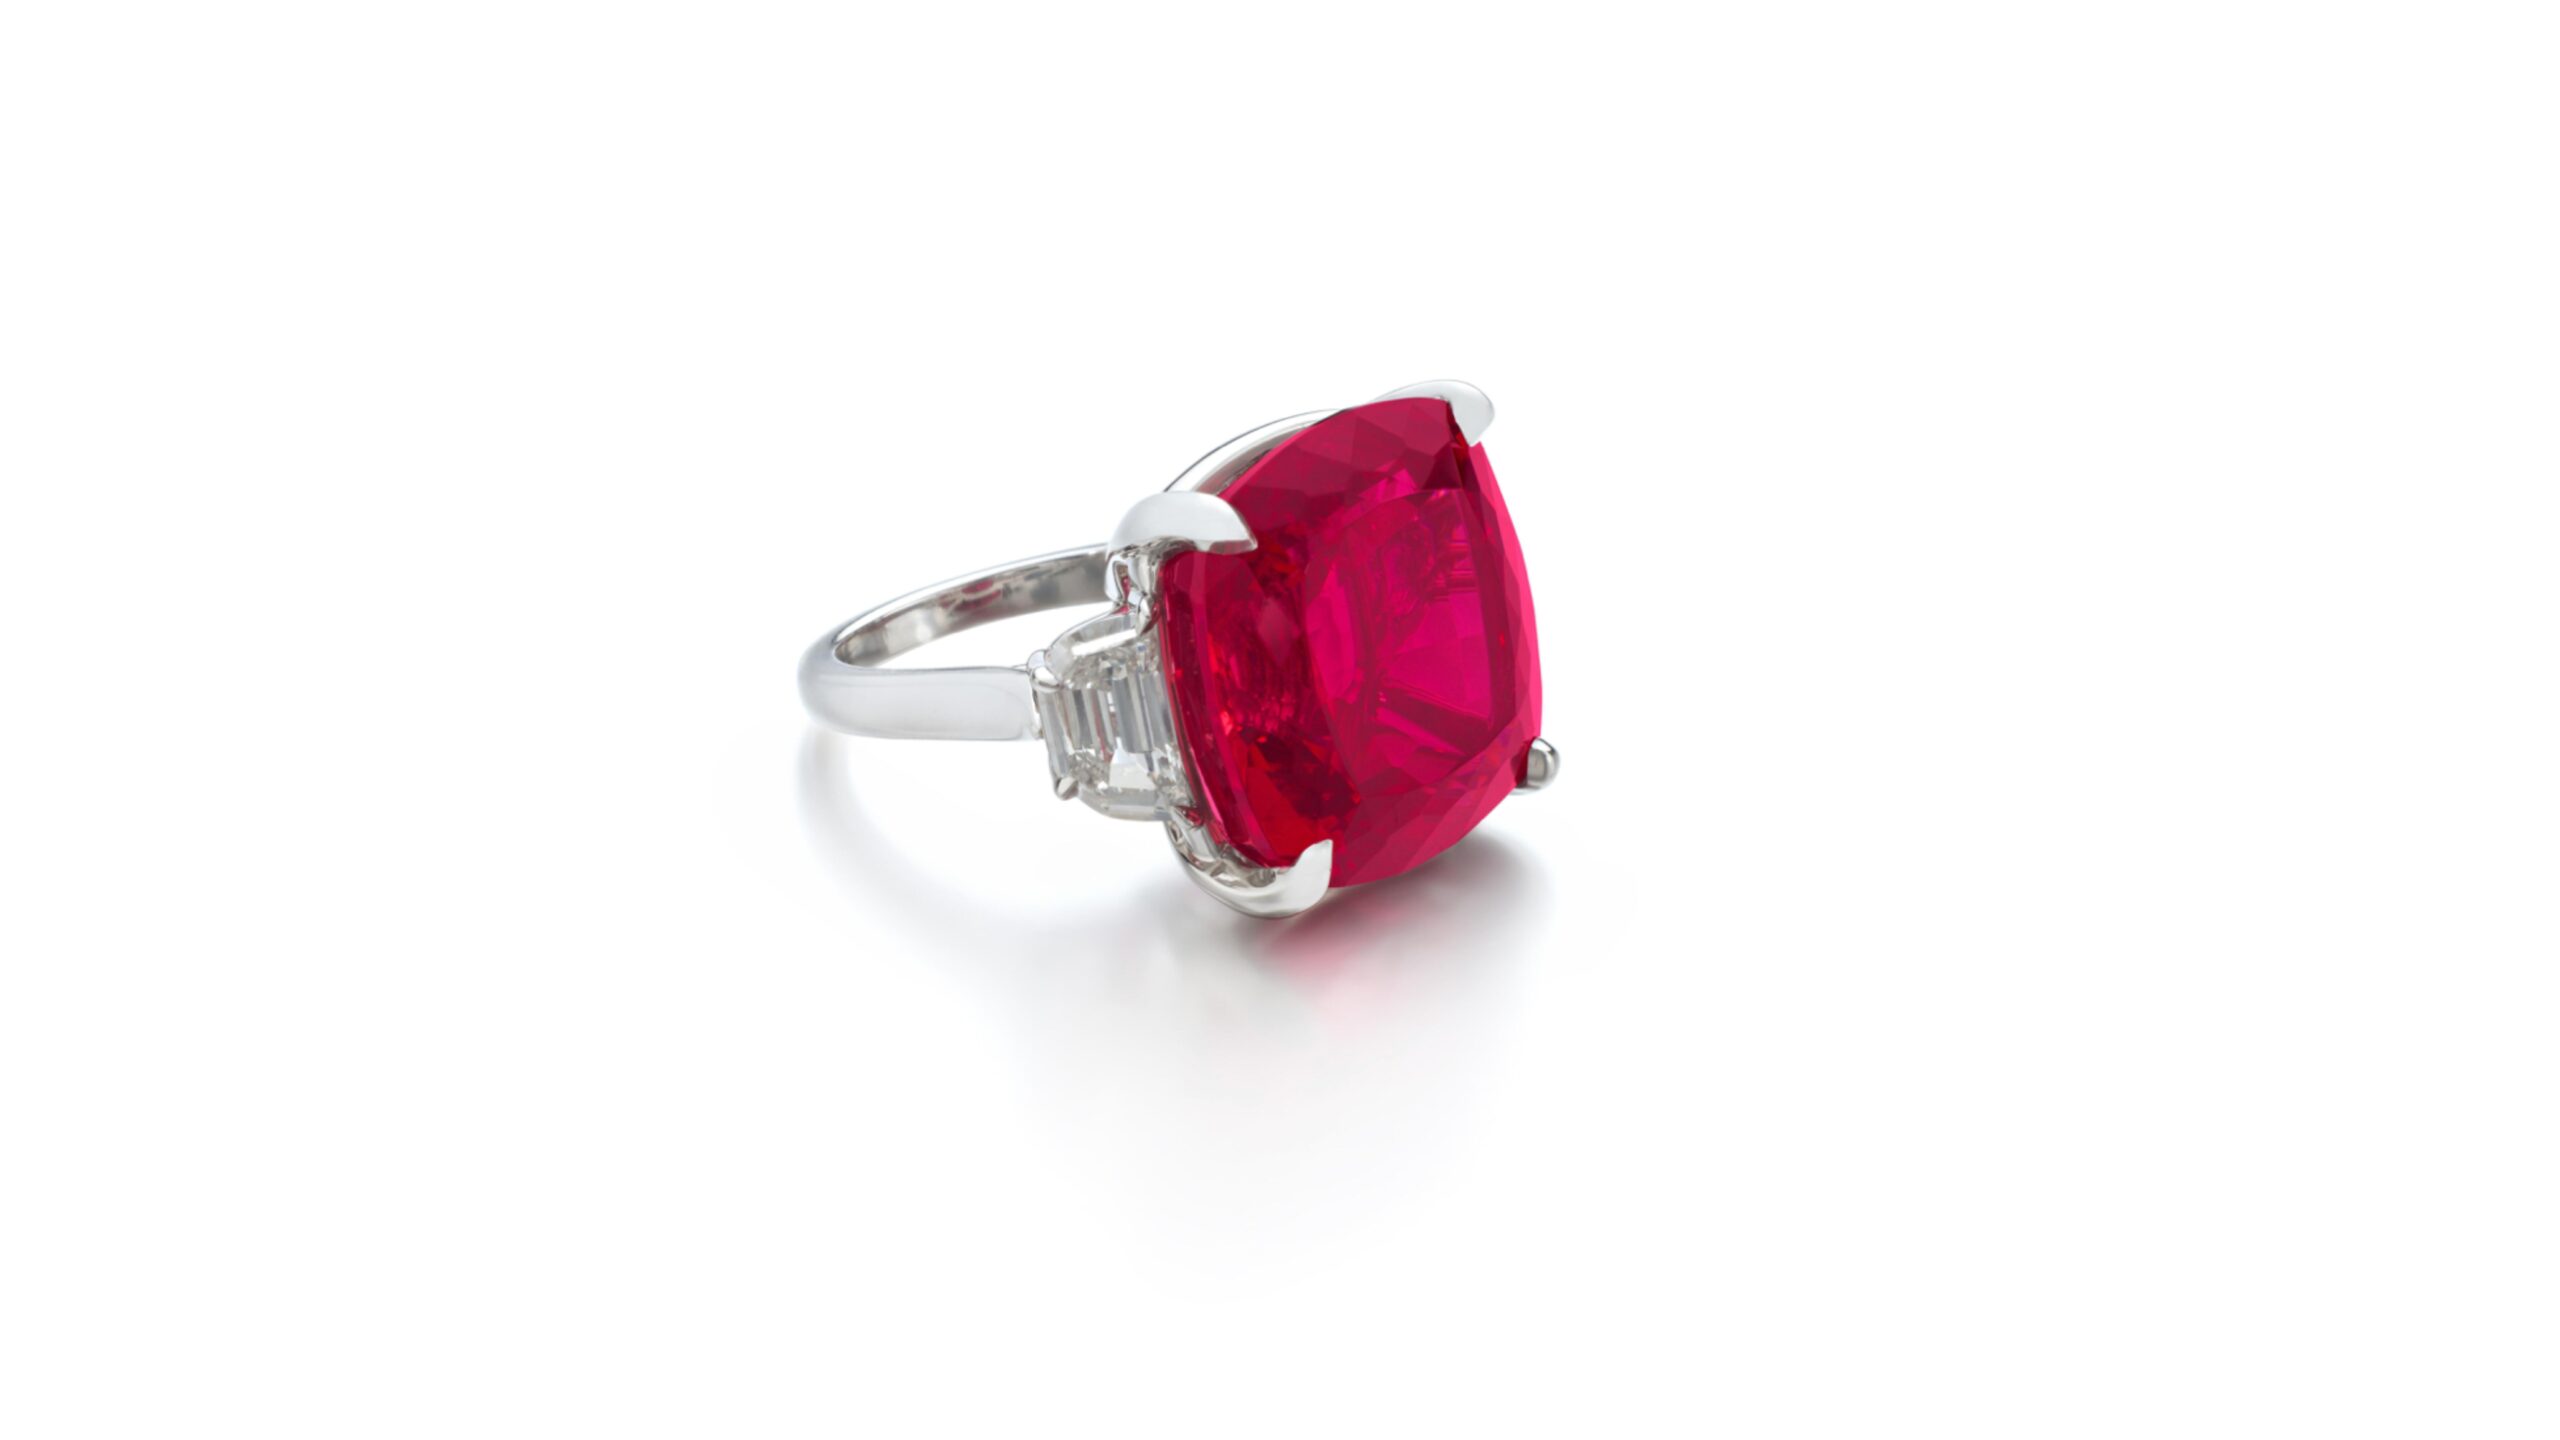 Important spinel and diamond ring